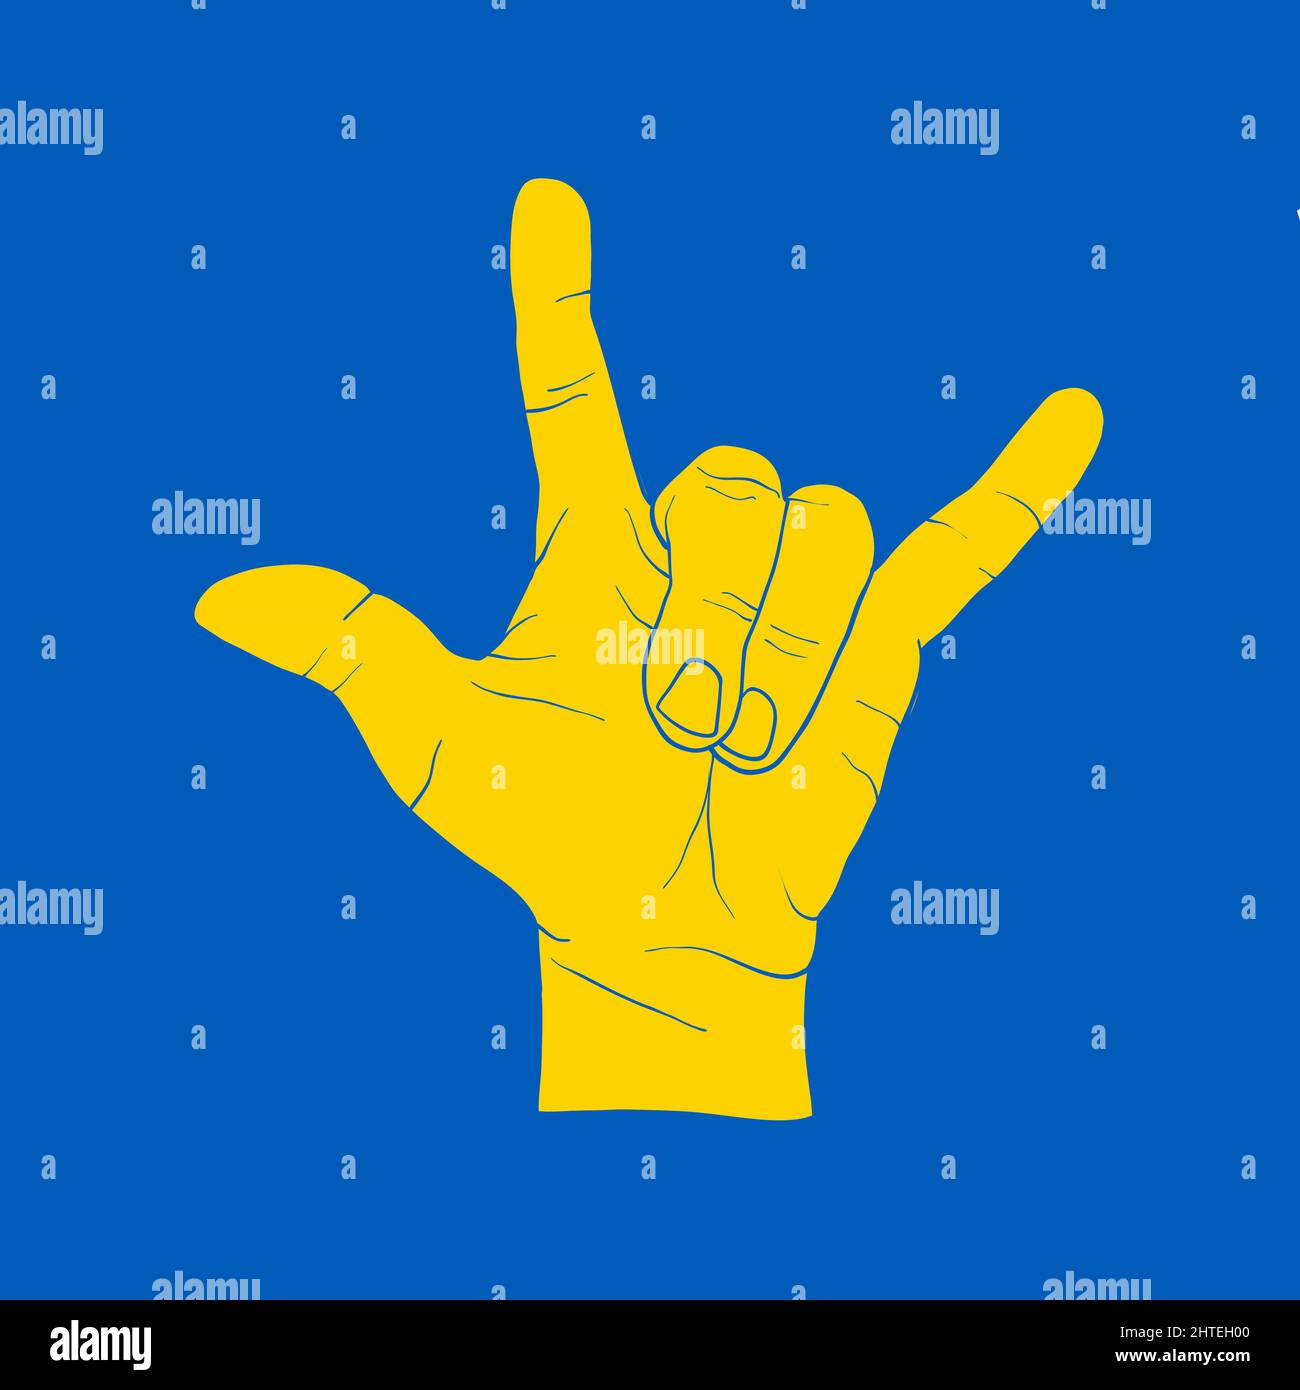 Yellow Devil hand sign on blue. Support icon for Kyiv and Ukraine people. Stay Strong together. Patriotic symbol, icon.-SupplementalCategories+=Images Stock Vector